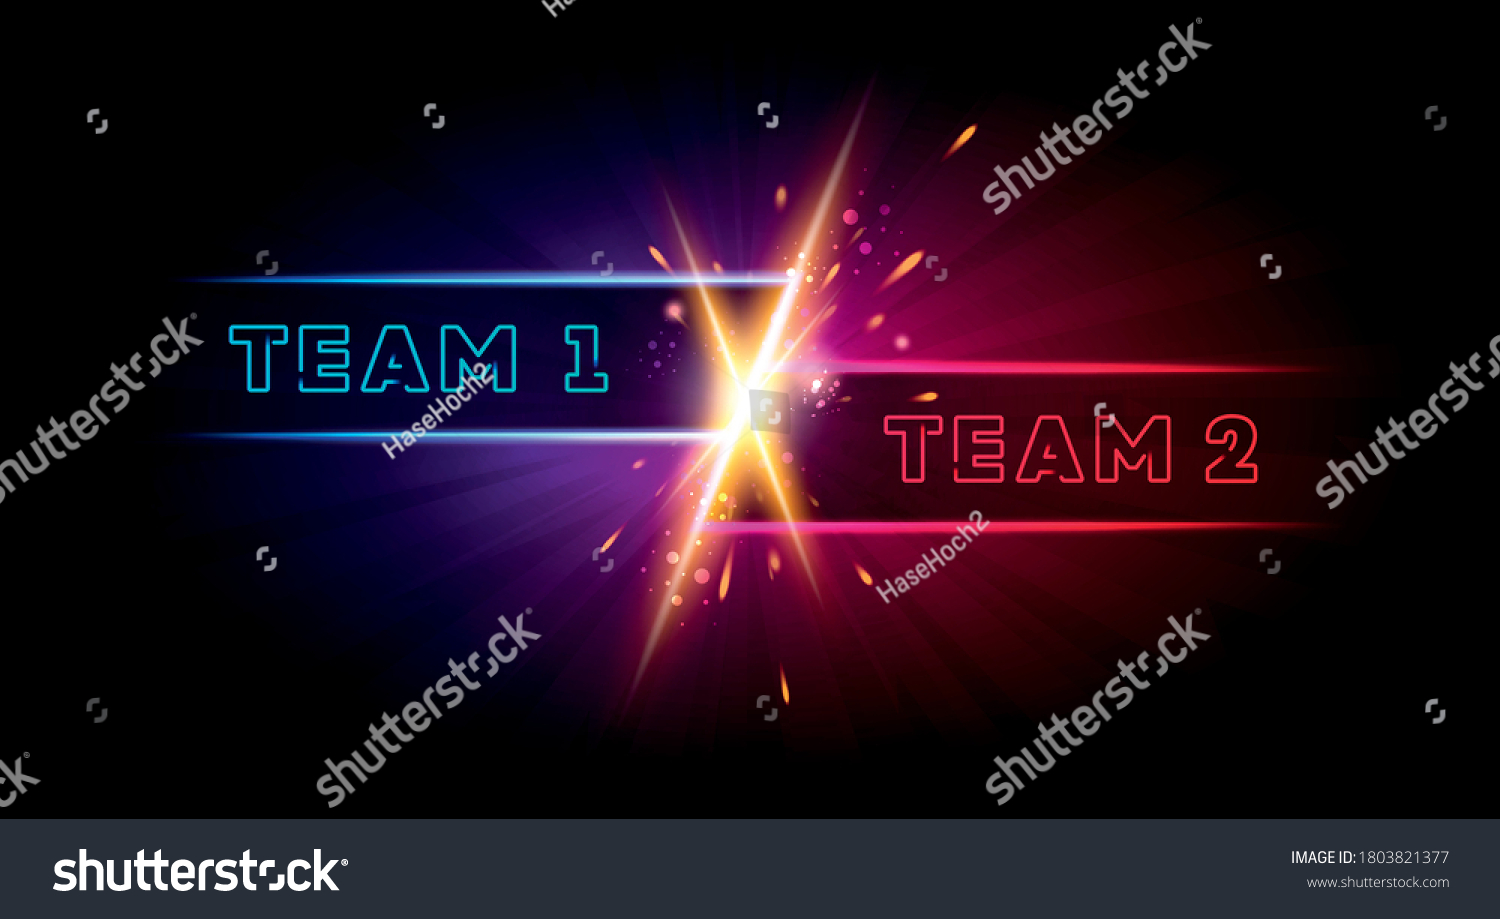 SVG of Vector Illustration Team 1 Versus Team 2 Battle Background. VS Match With Two Players svg